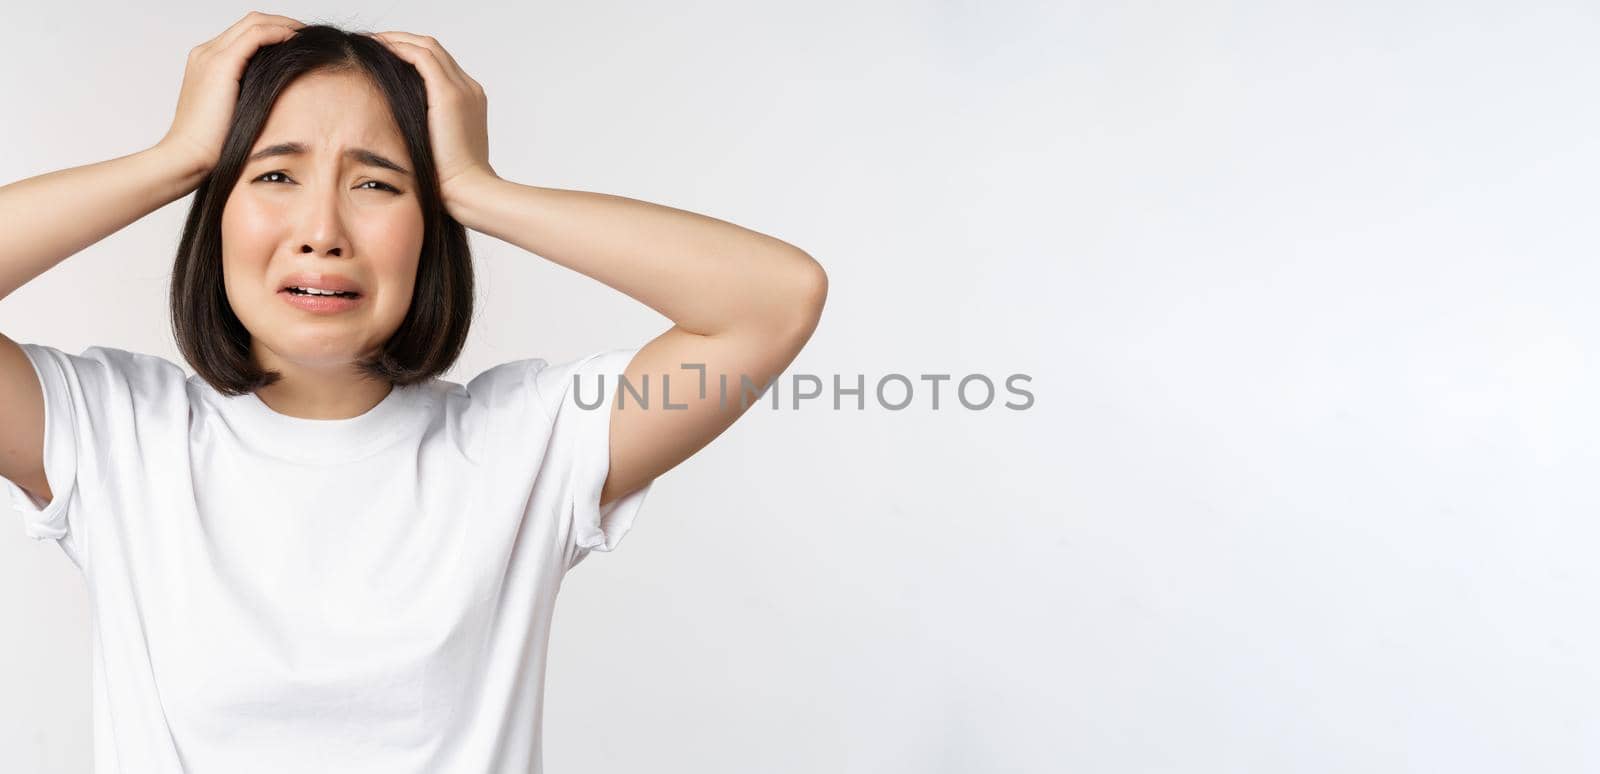 Desperate young korean woman holding hands on head, panicking, crying and standing distressed against white background.